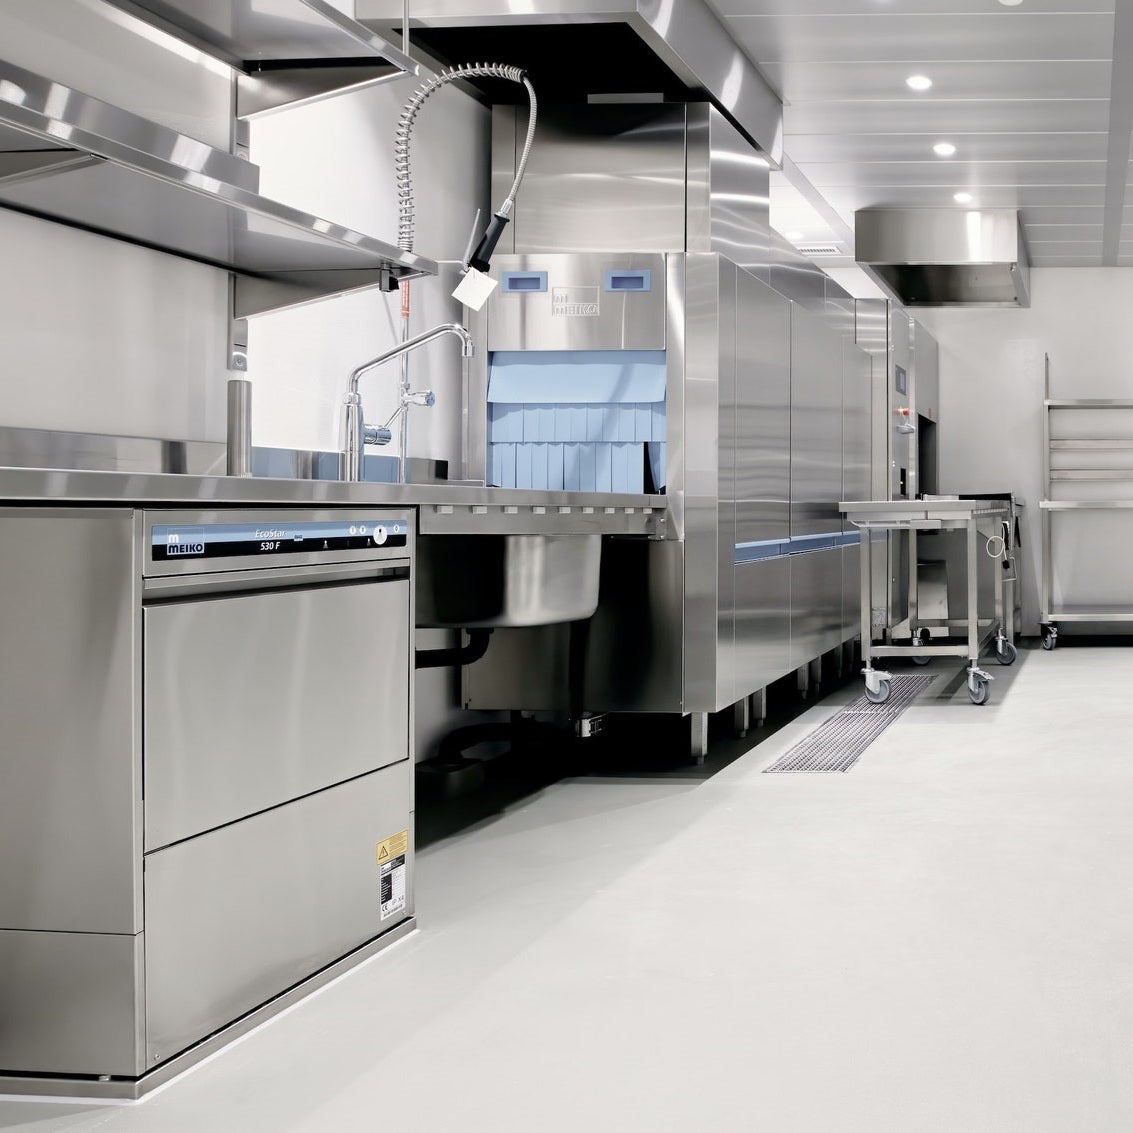 Why is stainless steel the best metal for everyday kitchen equipment?